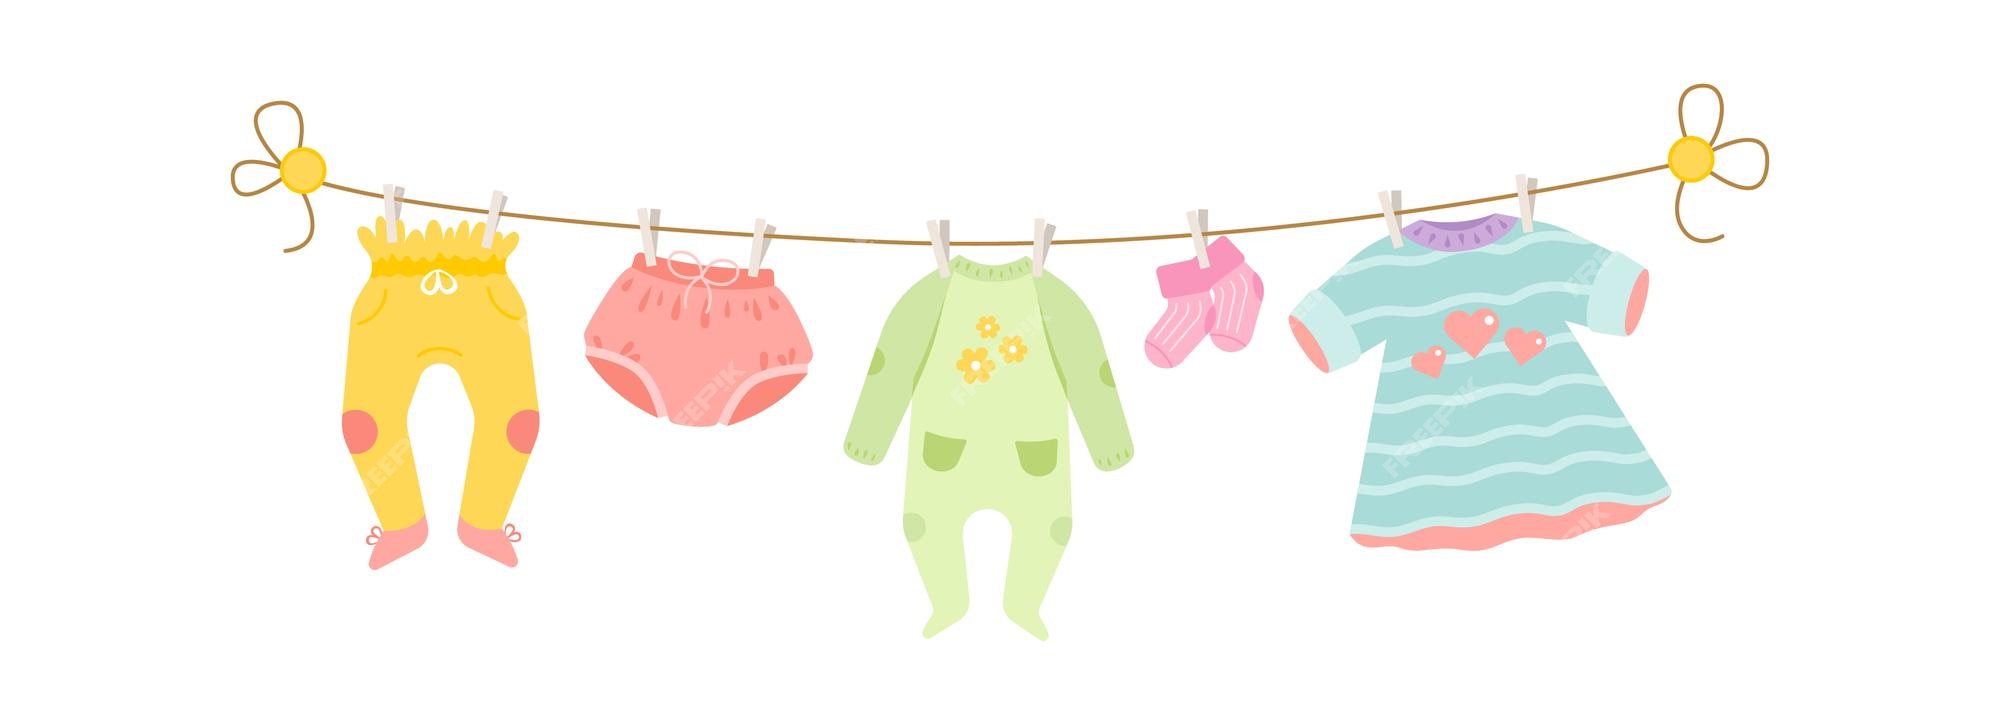 Cartoon Baby Clothes Images - Free Download on Freepik